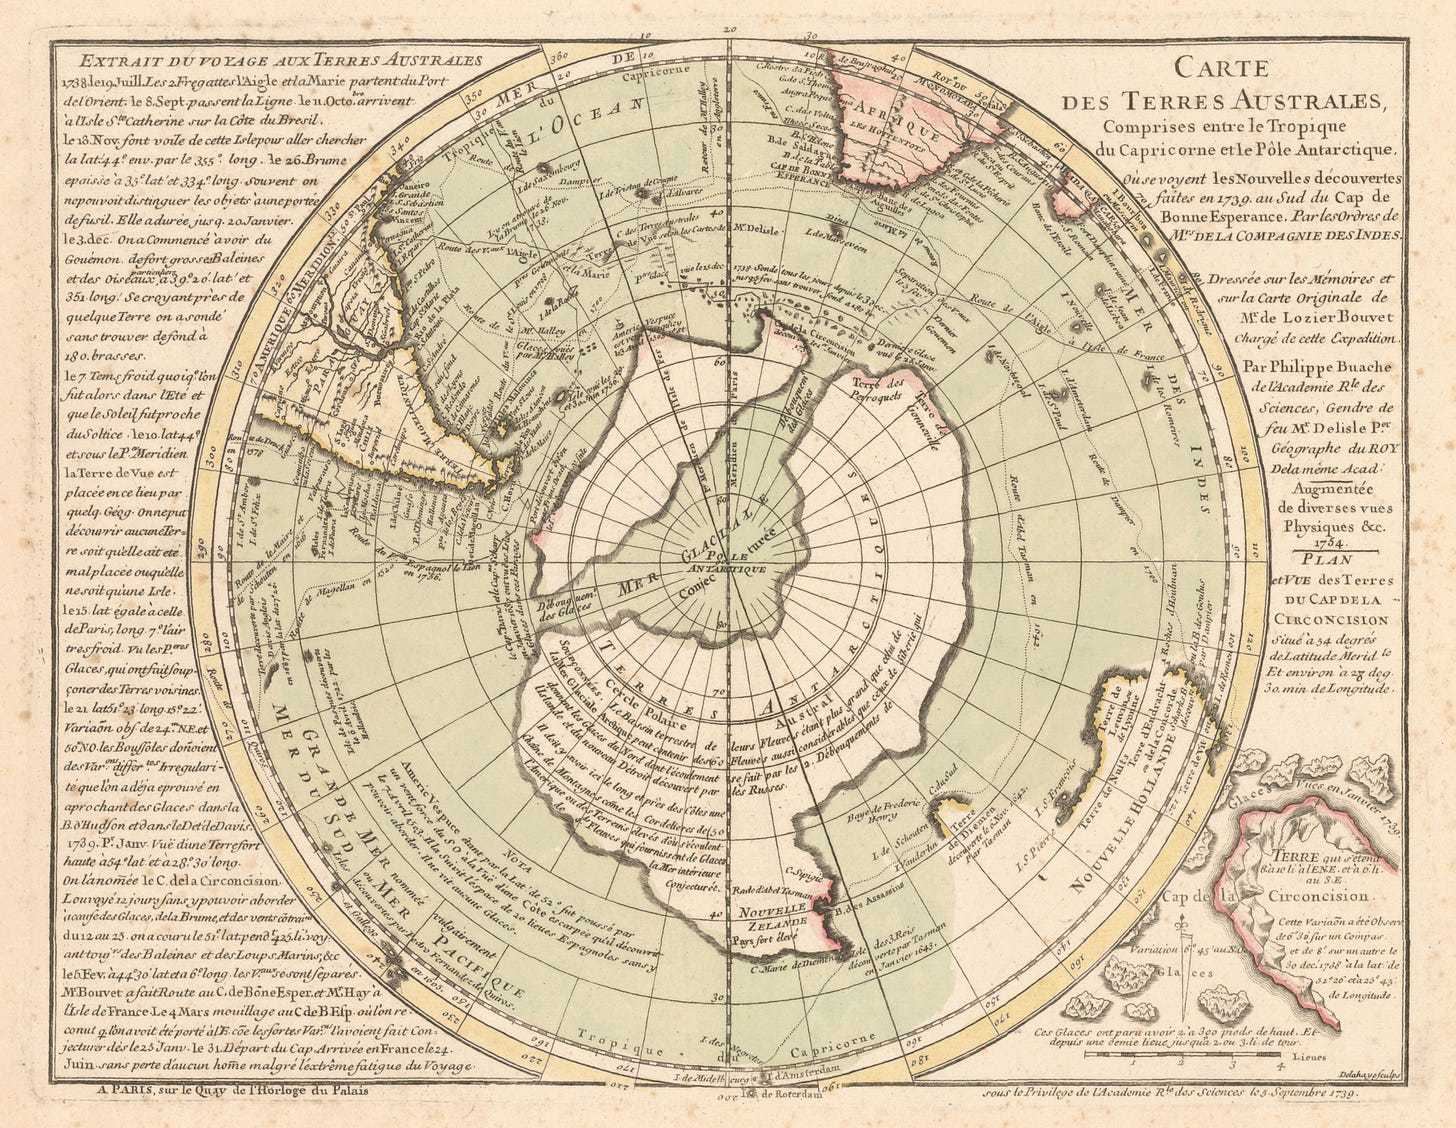 Map of the mythical Terra Australis (1754) [3948 x 3059] : MapPorn